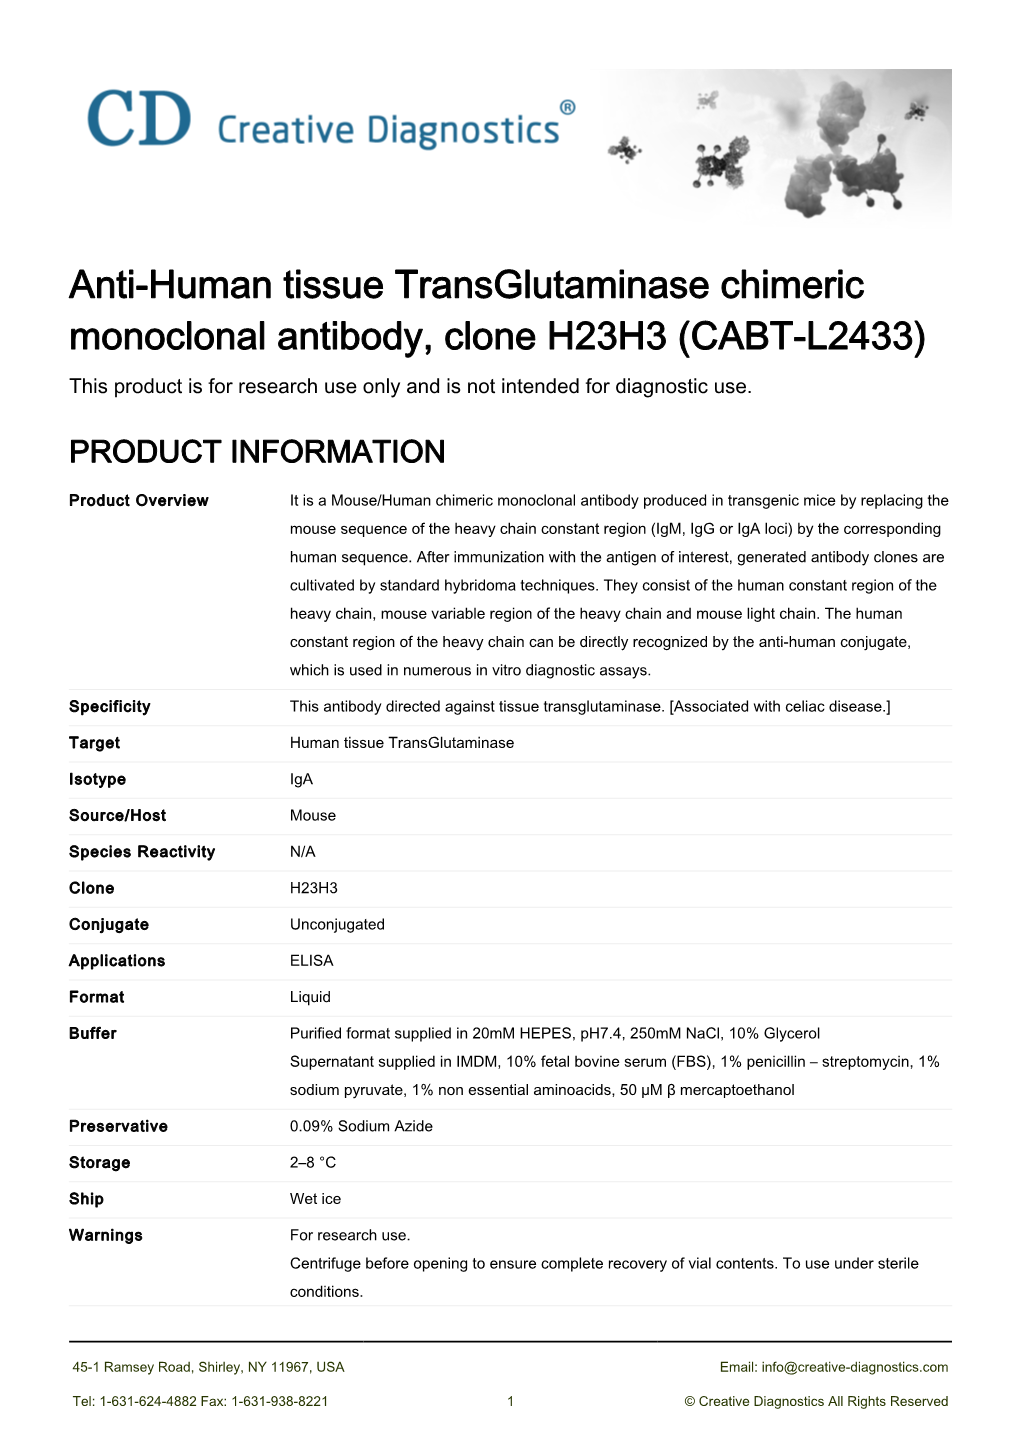 Anti-Human Tissue Transglutaminase Chimeric Monoclonal Antibody, Clone H23H3 (CABT-L2433) This Product Is for Research Use Only and Is Not Intended for Diagnostic Use